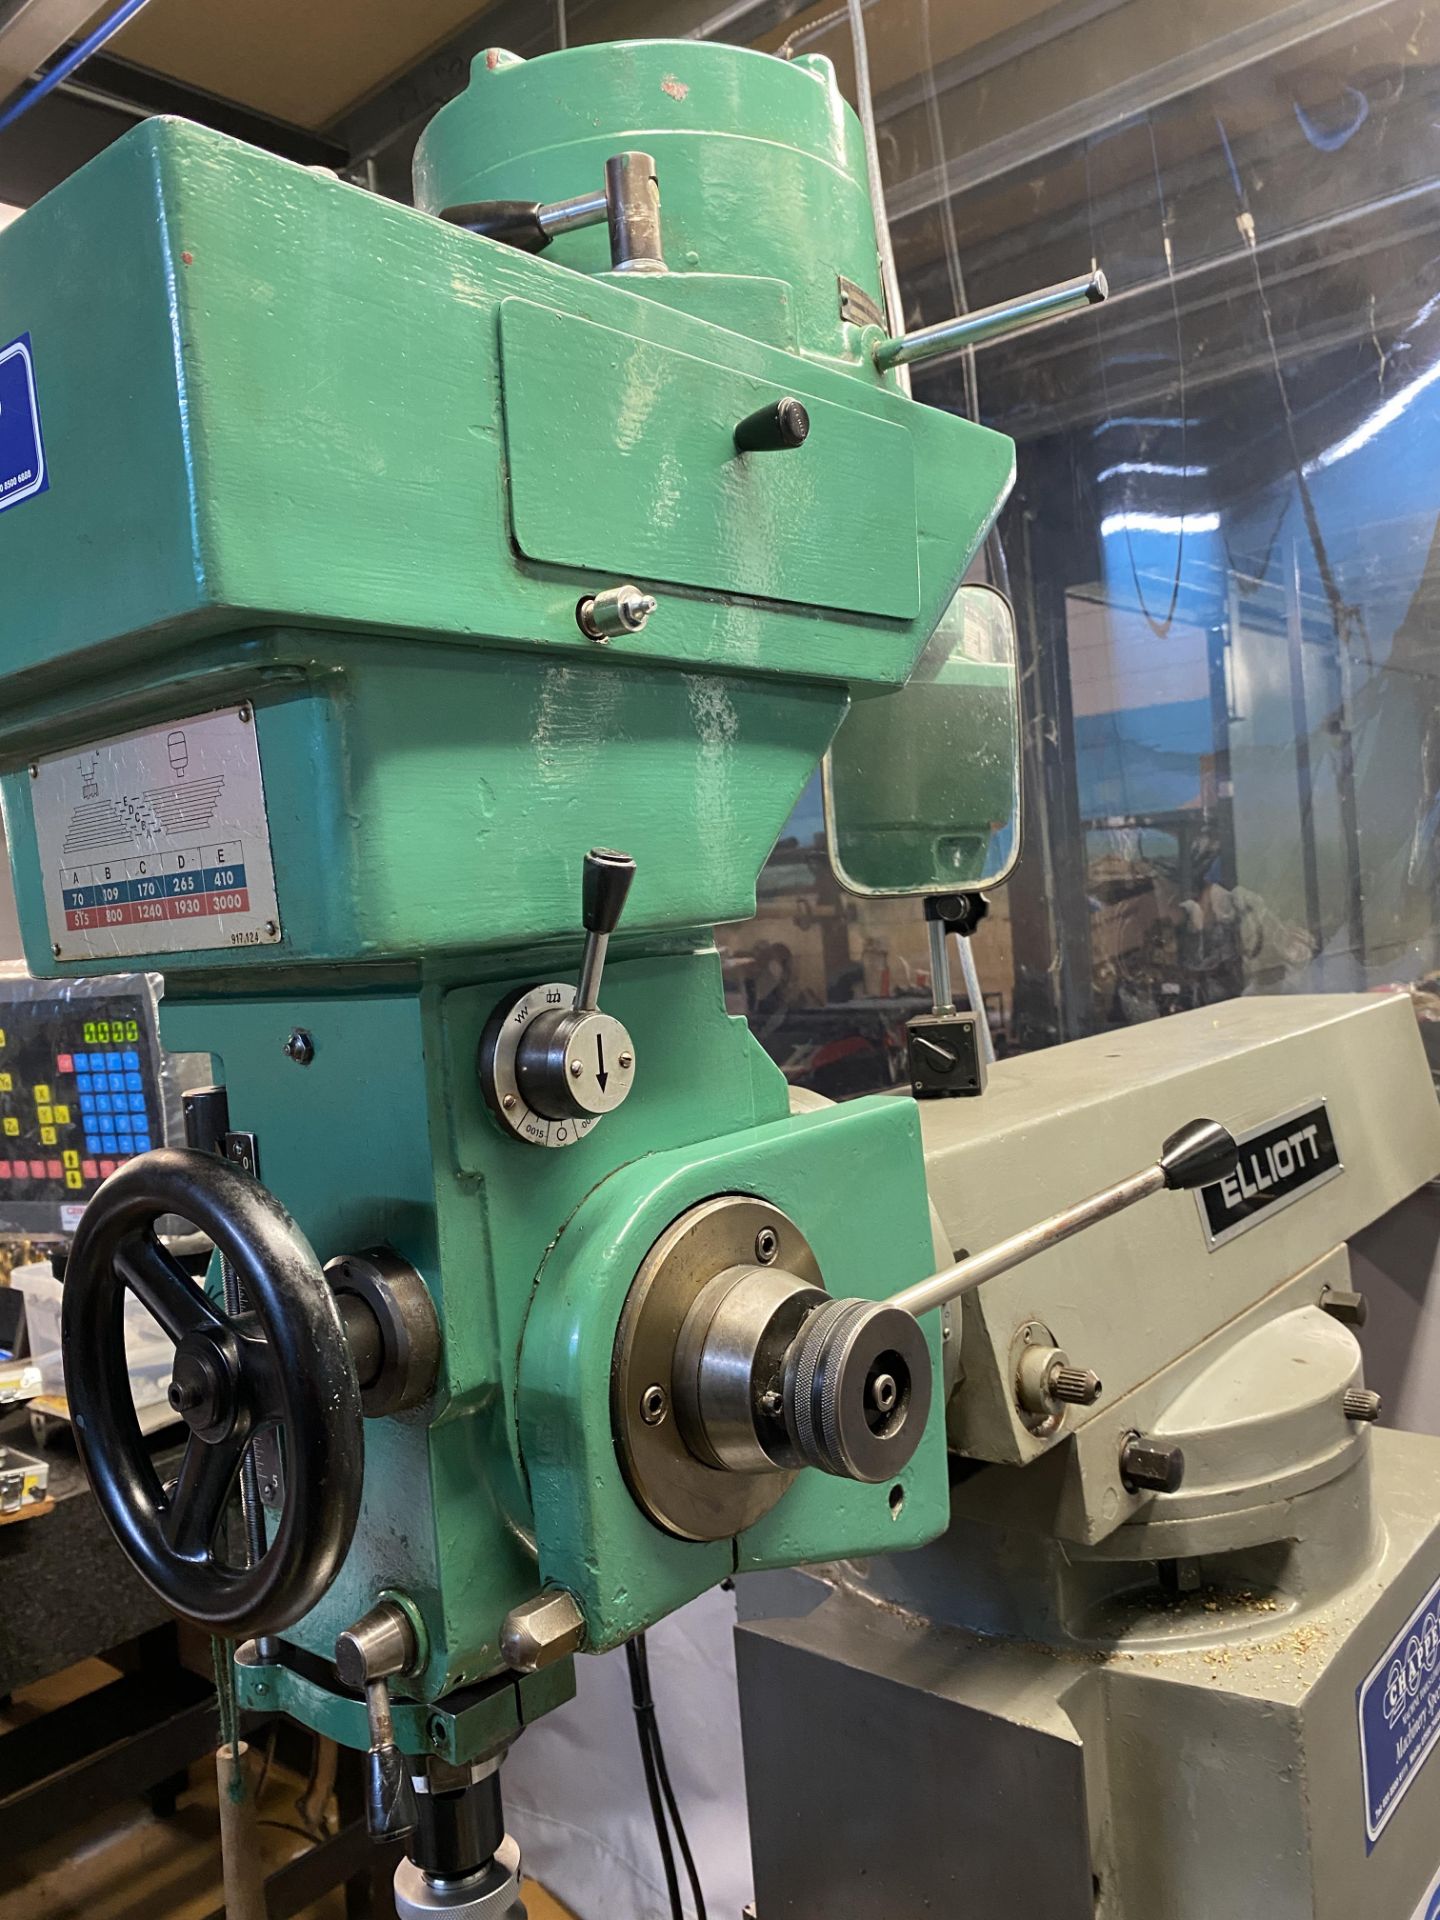 Elliott Milmor 10 Turret Milling Machine Serial No: 015807-119, complete with Sinpo - 3 Axis Dro - Image 13 of 17